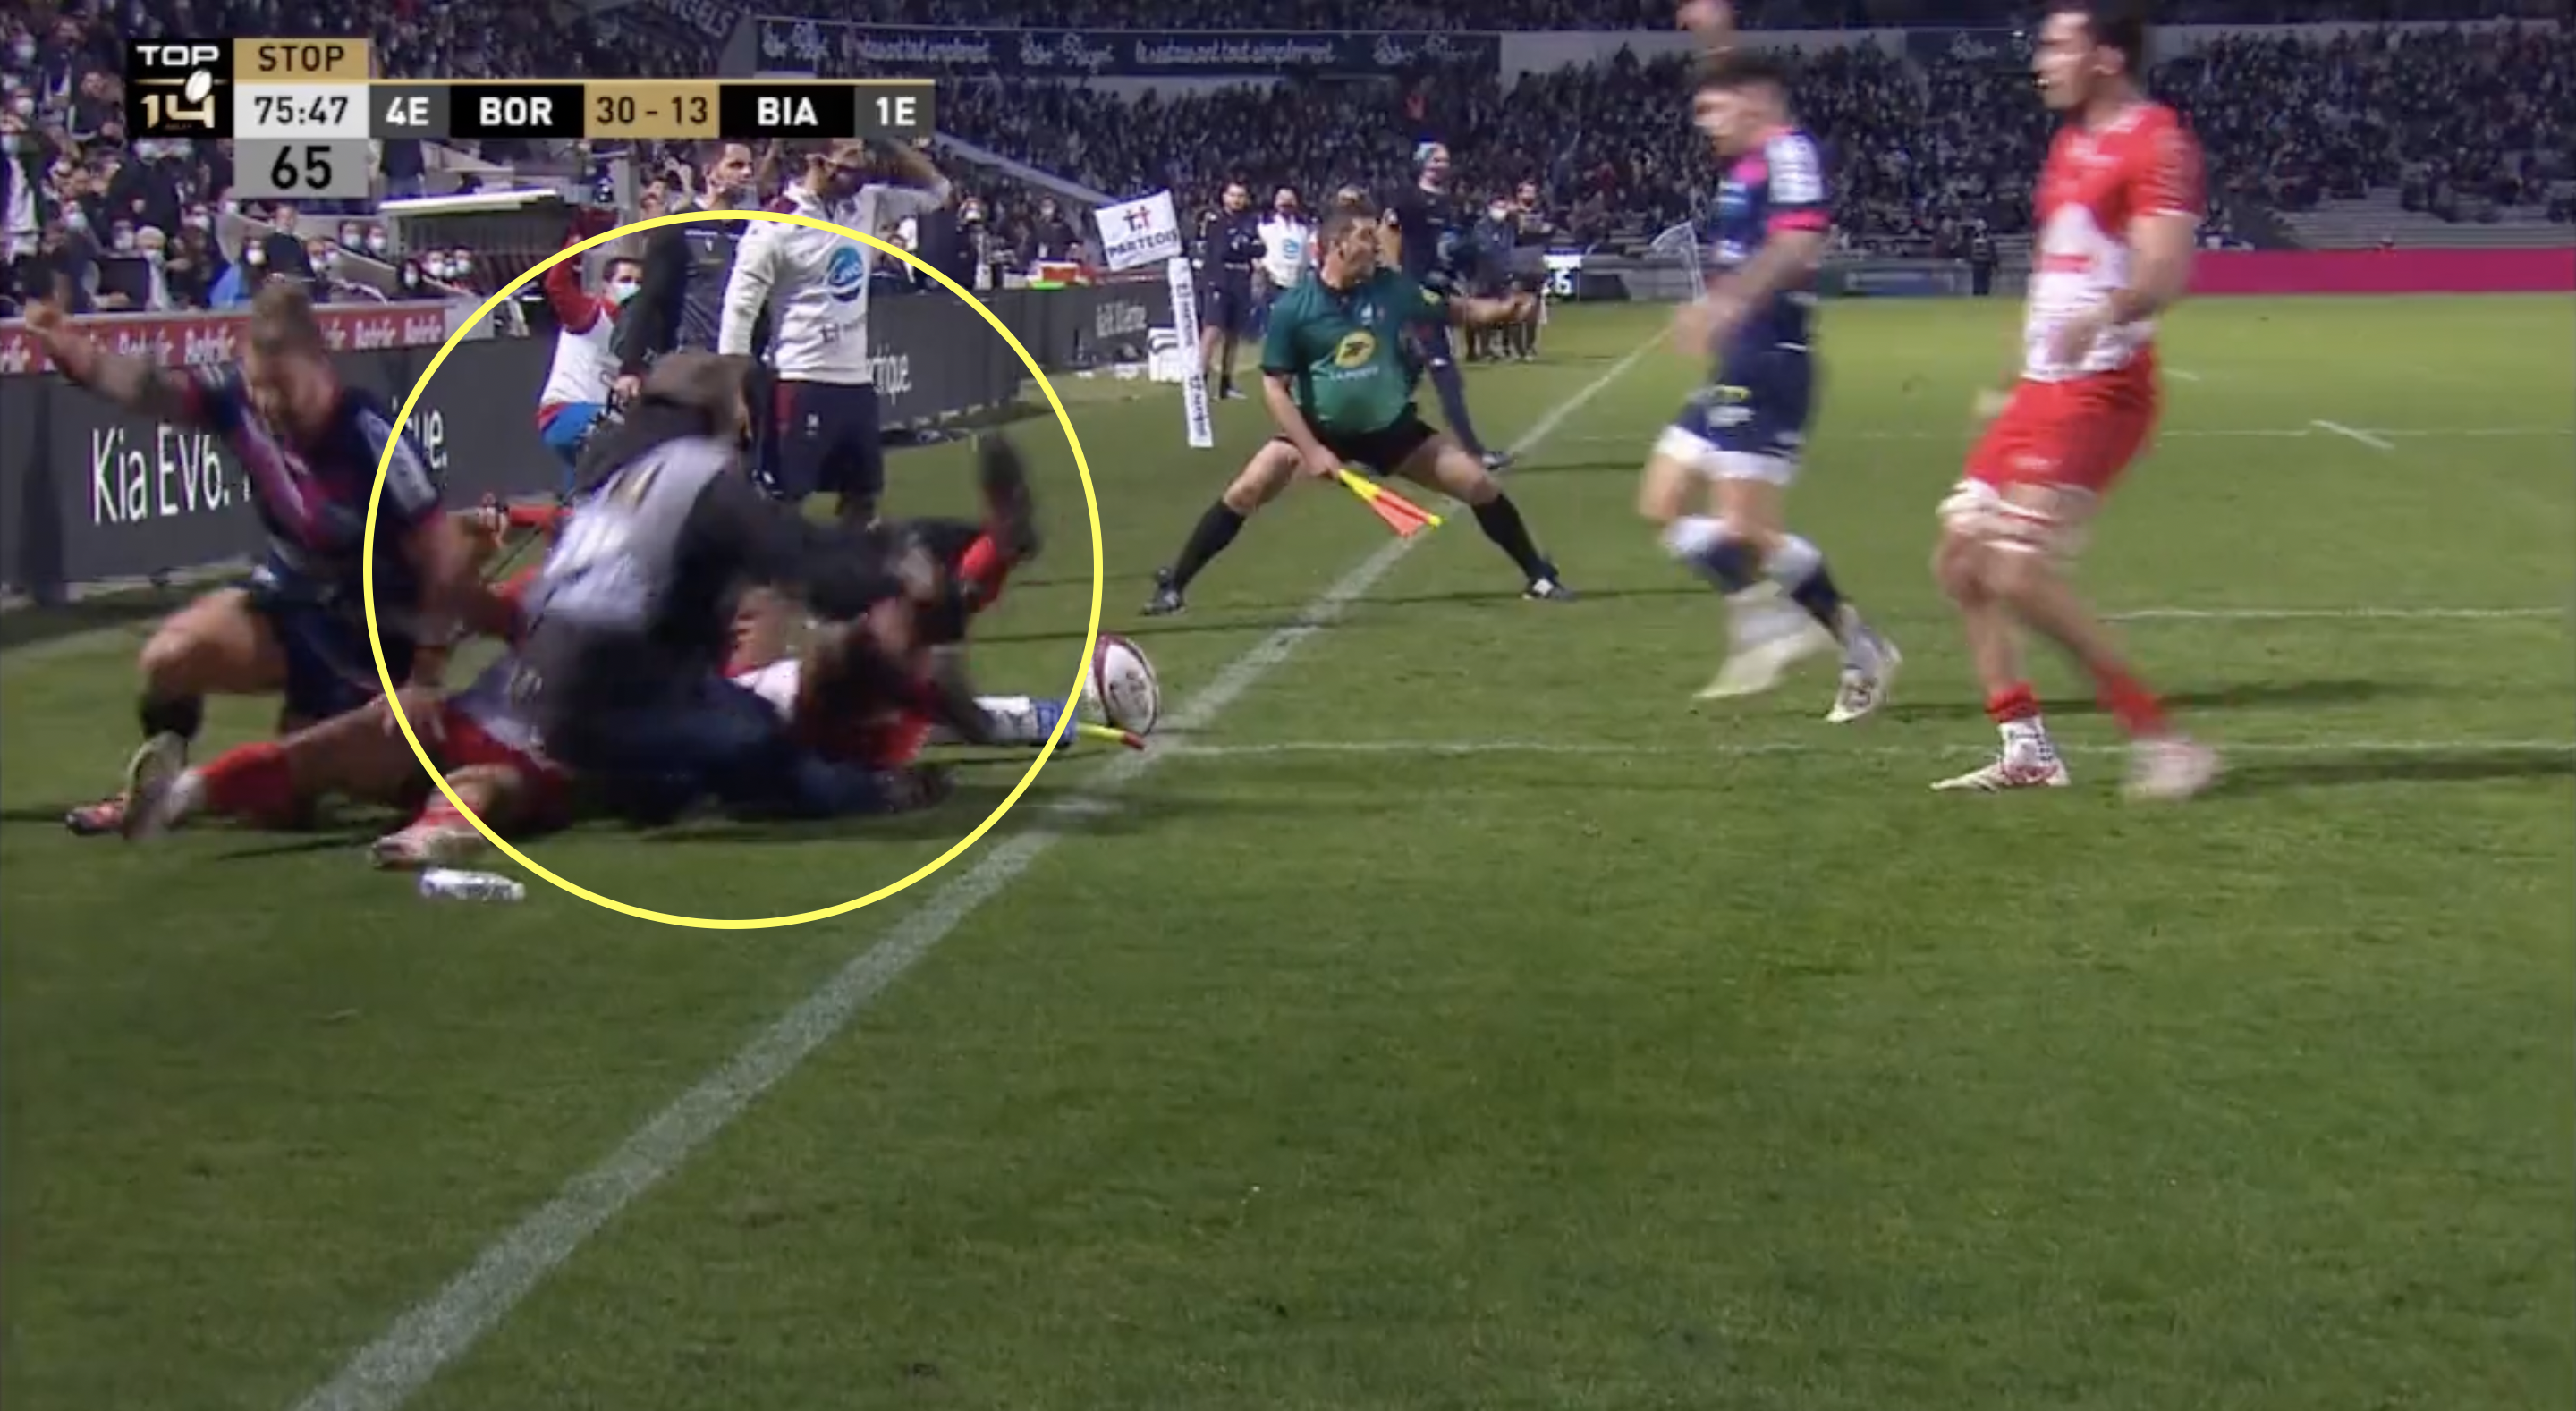 The Top 14 injury over the weekend that is as bizarre as it is gruesome